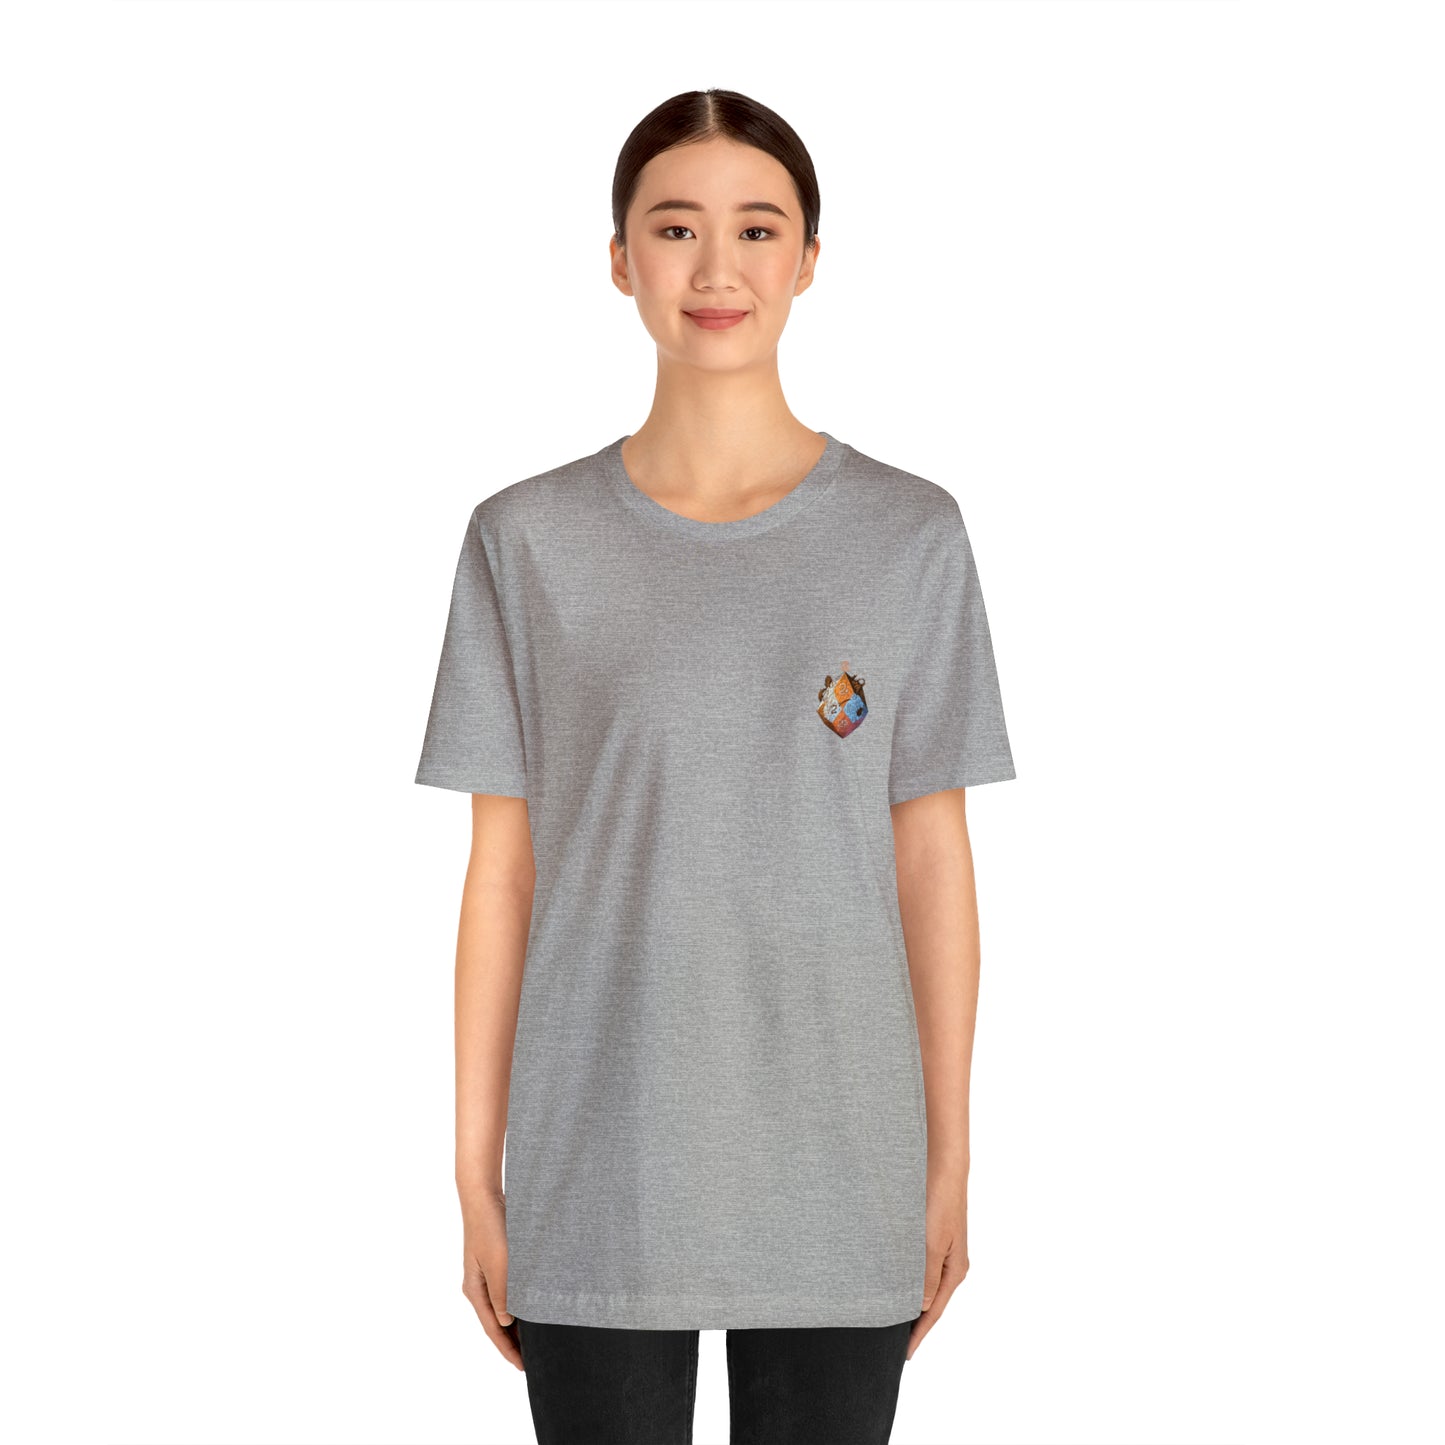 athletic-heather-quest-thread-tee-shirt-with-small-orange-blue-d20-dice-on-left-chest-of-shirt